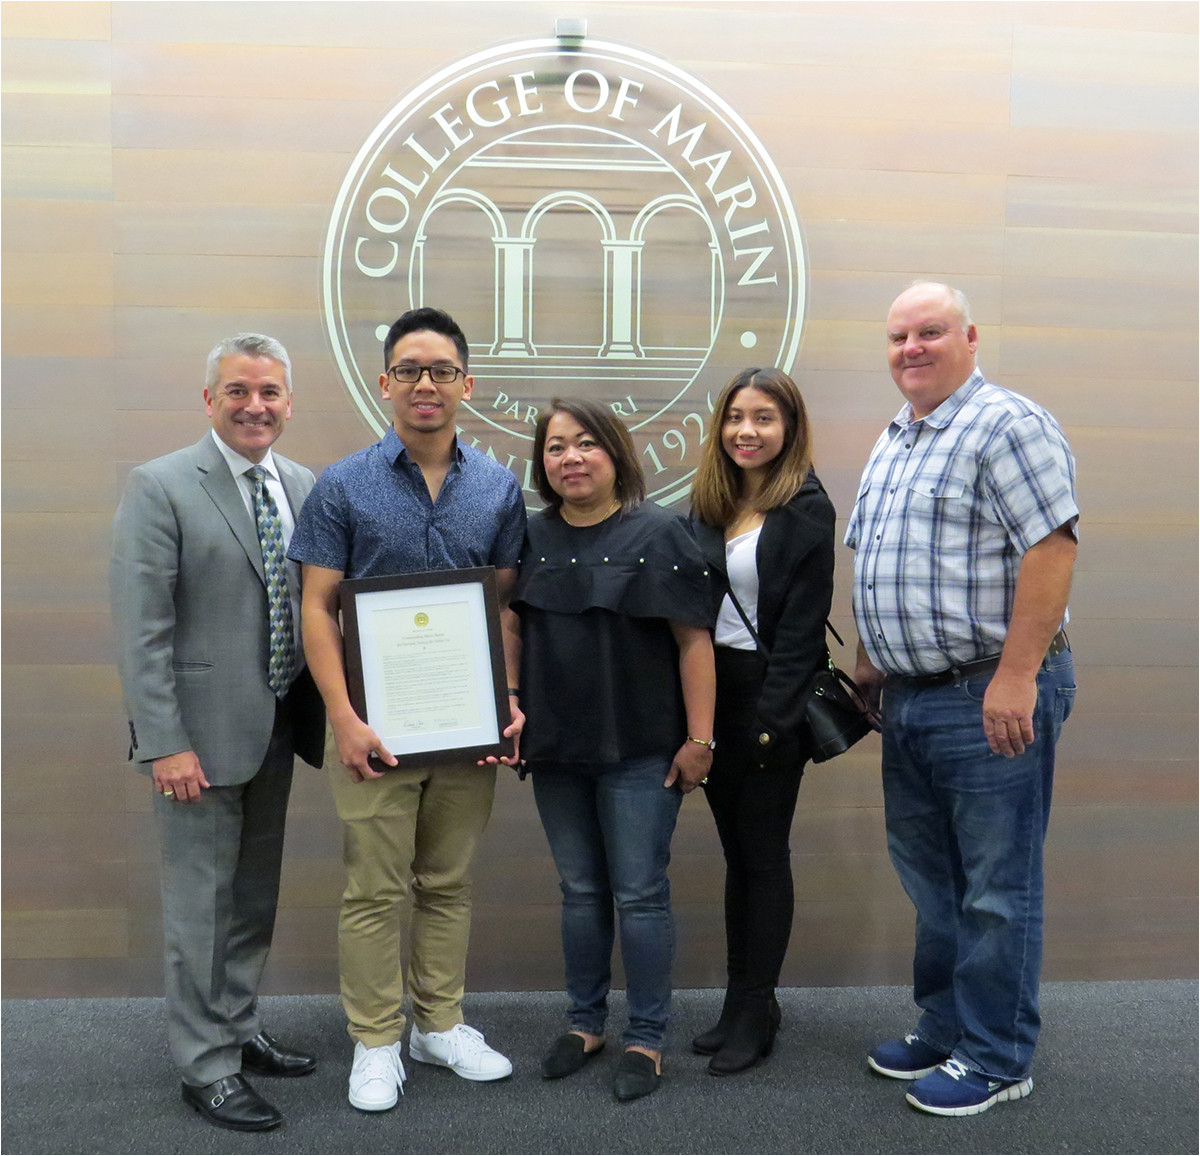 College Of Marin Community Education Catalog Board Commends Nursing Student Mario Monte for Heroism During Tubbs